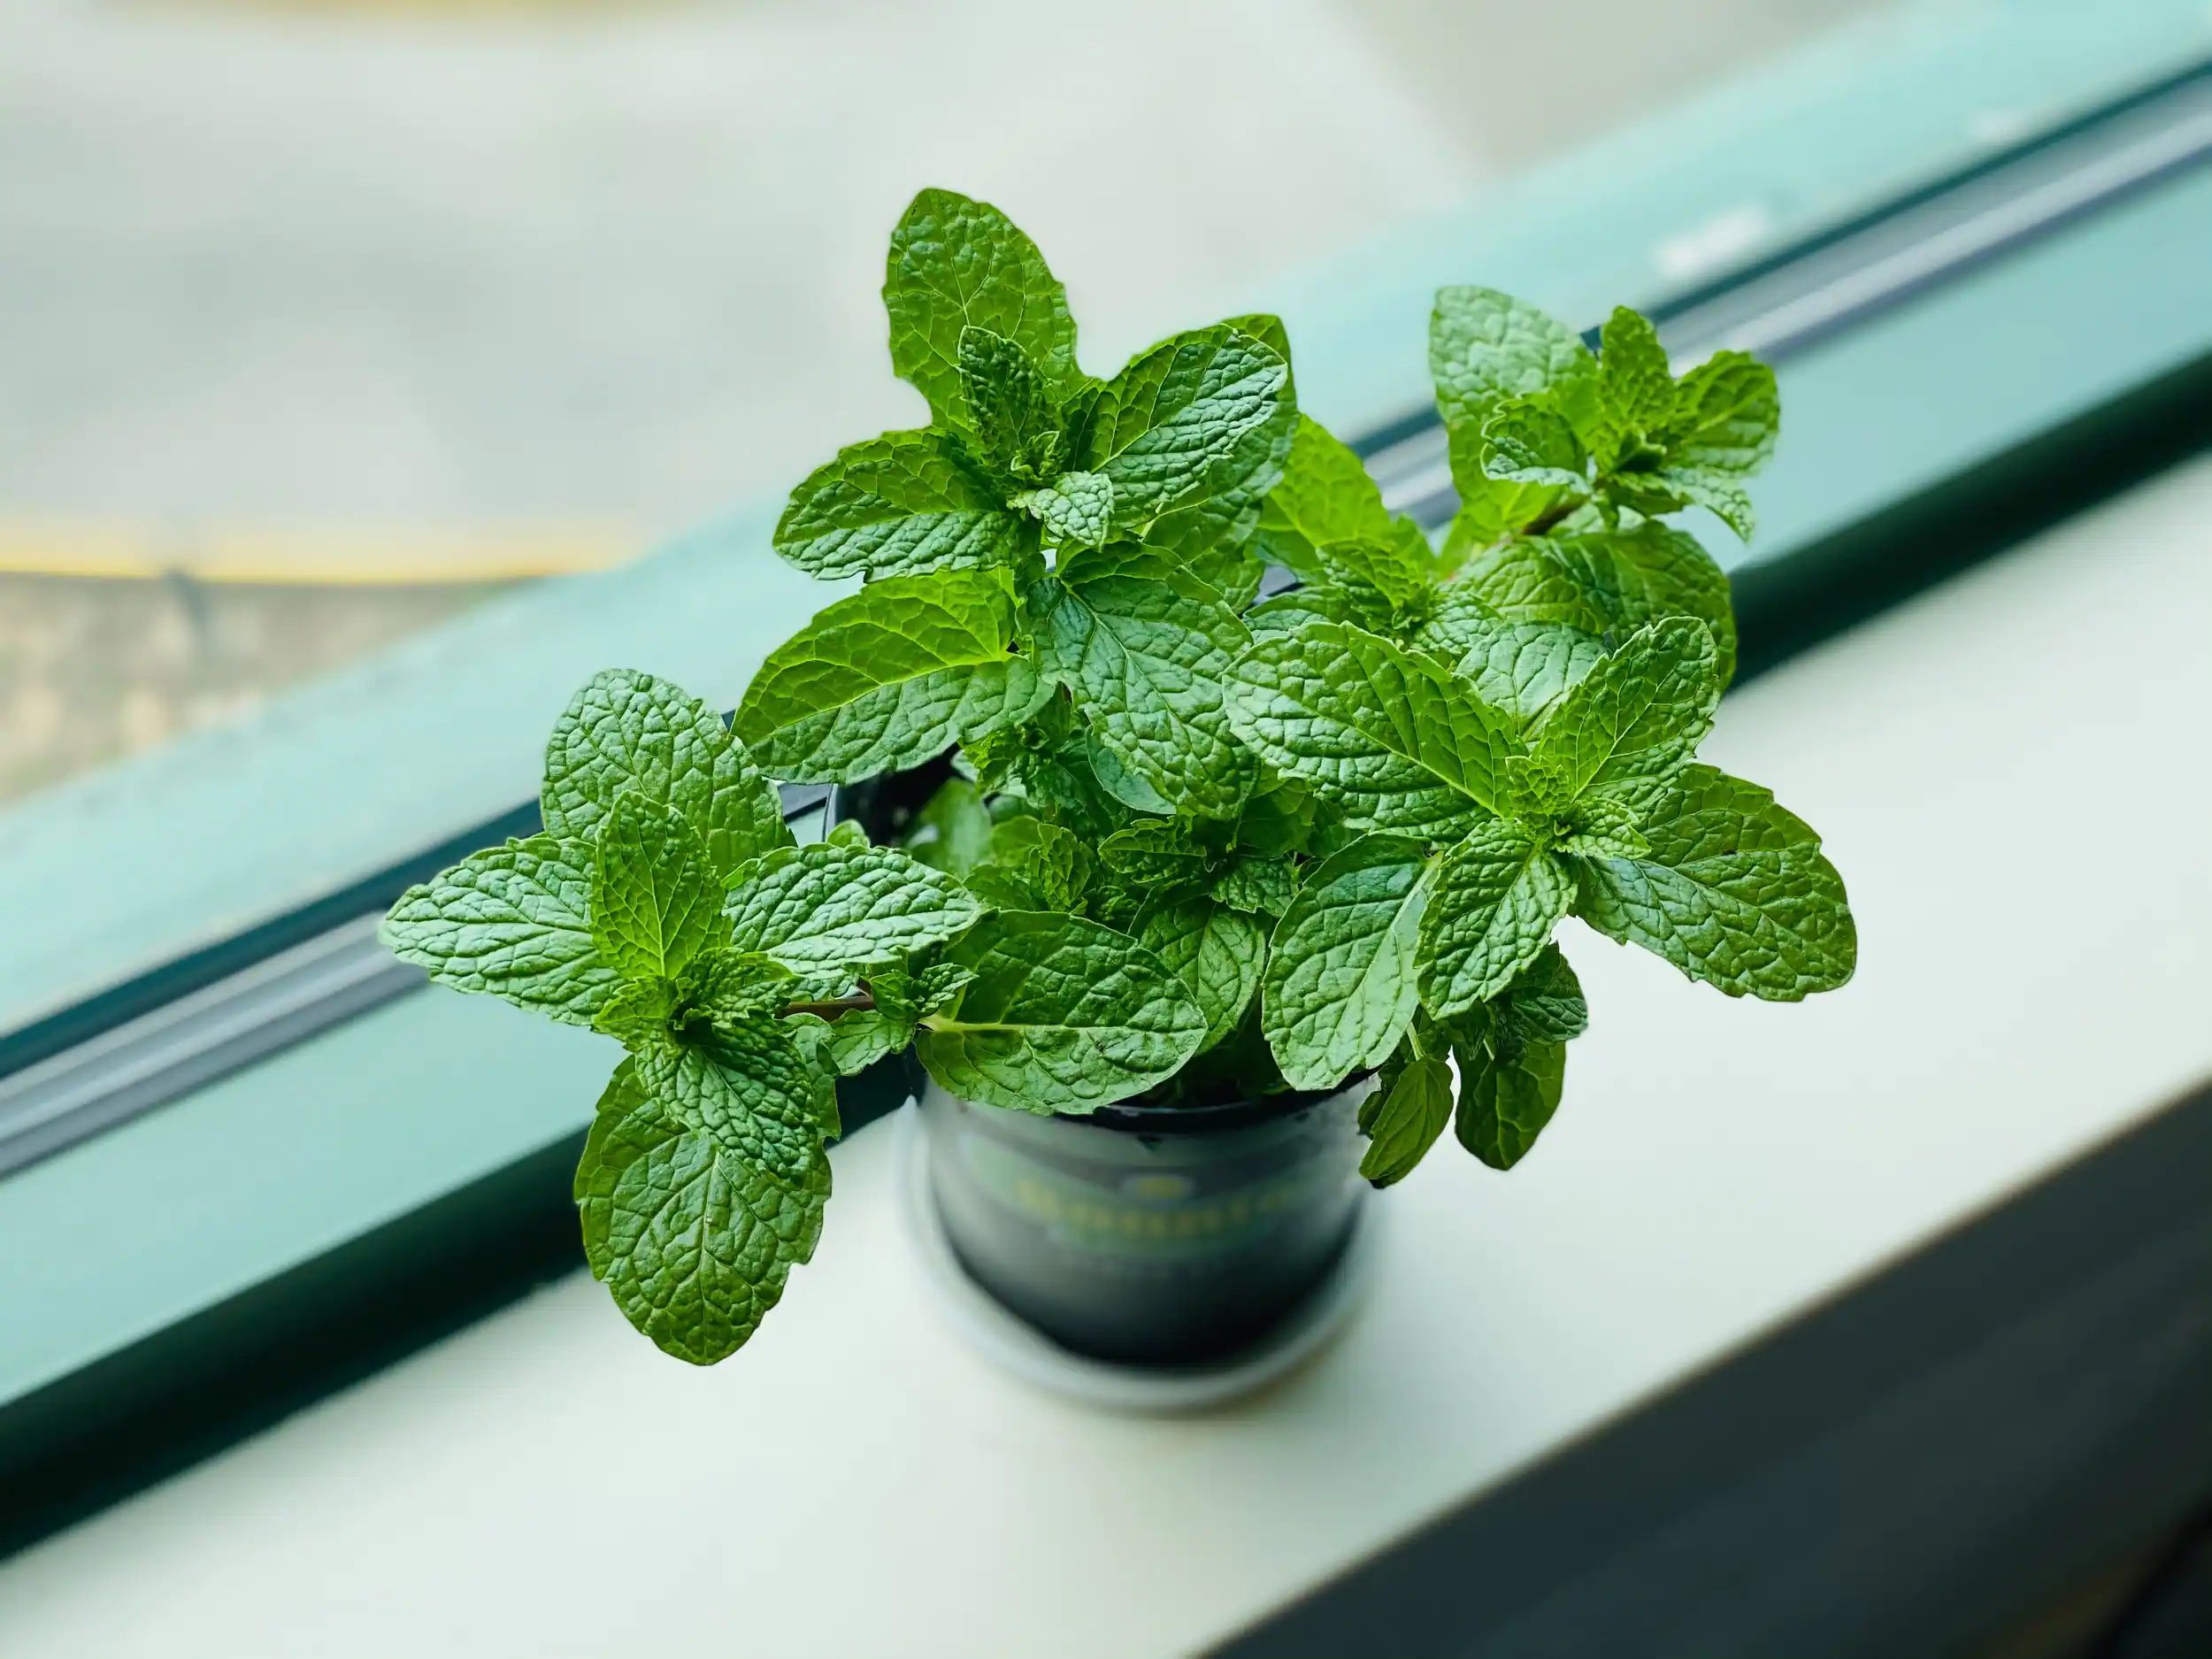 Mint leaves have many health benefits (1)